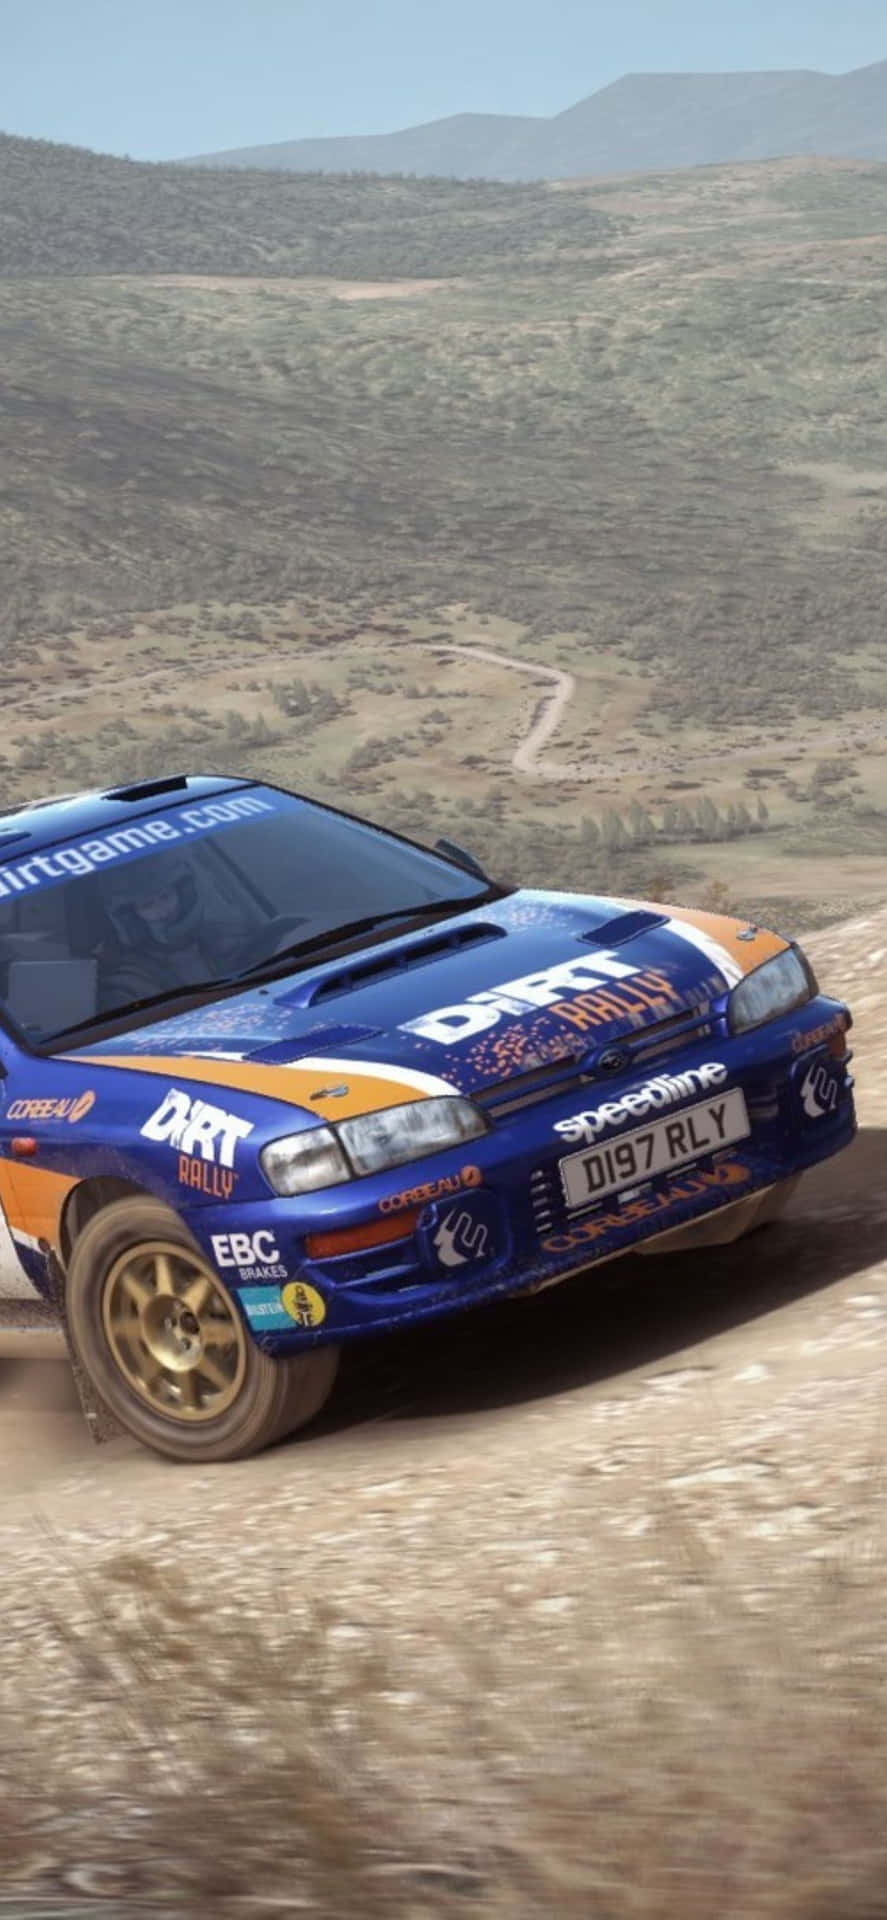 Get your heart racing with Dirt Rally on iPhone X